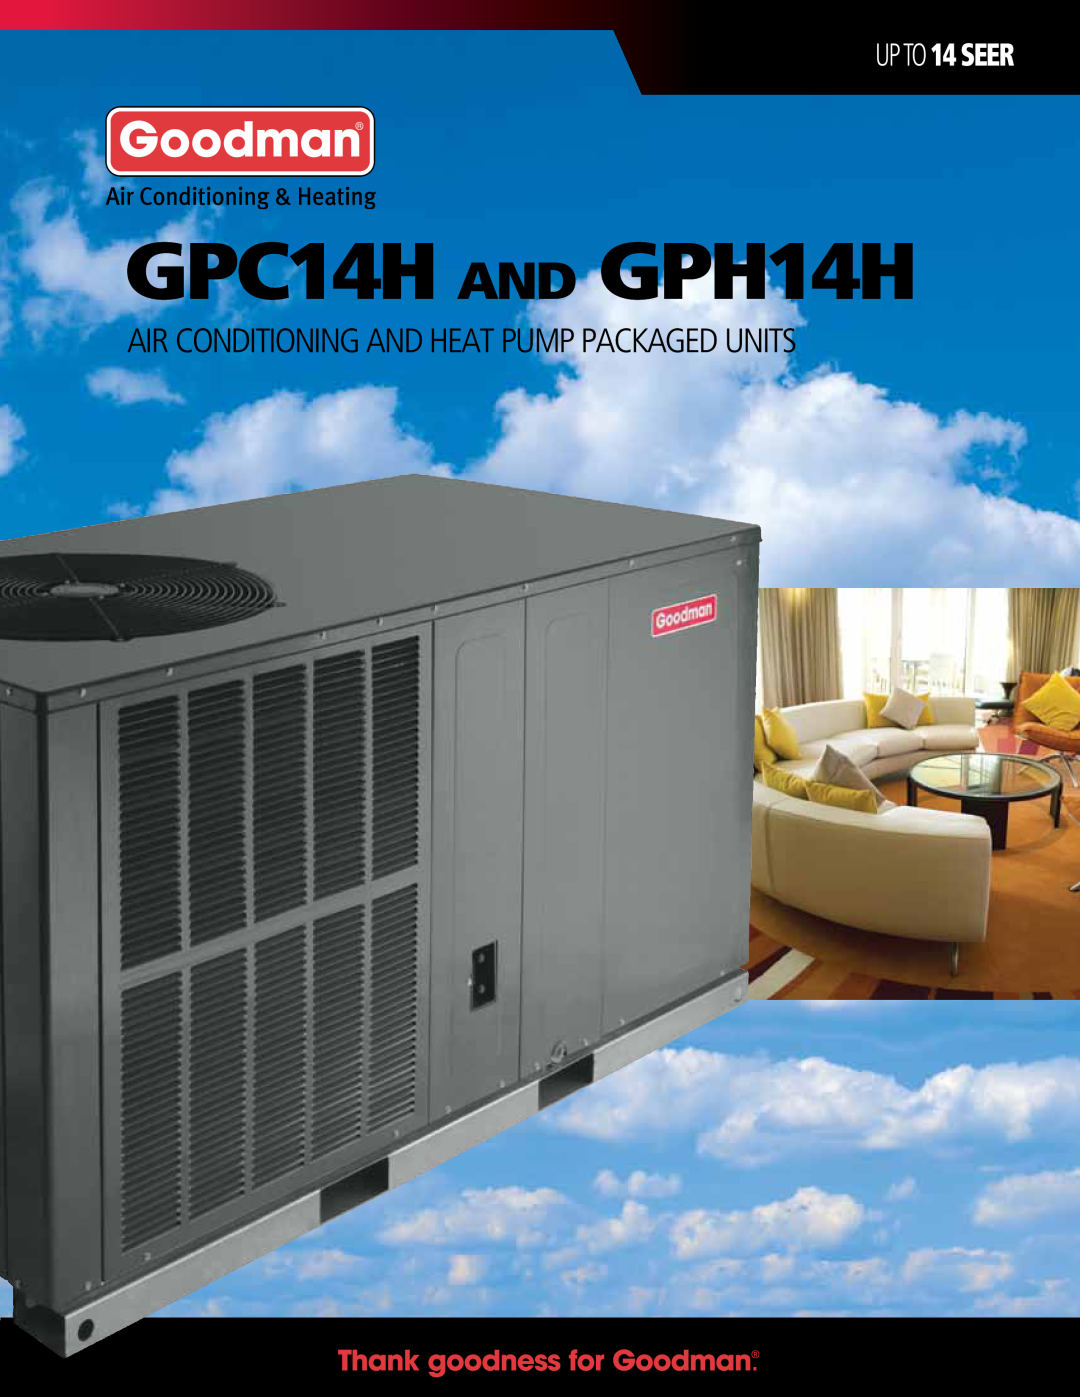 Goodman Mfg GPH14H dimensions Standard Features, Cabinet Features, Contents, up to 14 SEER, Packaged Heat Pump 